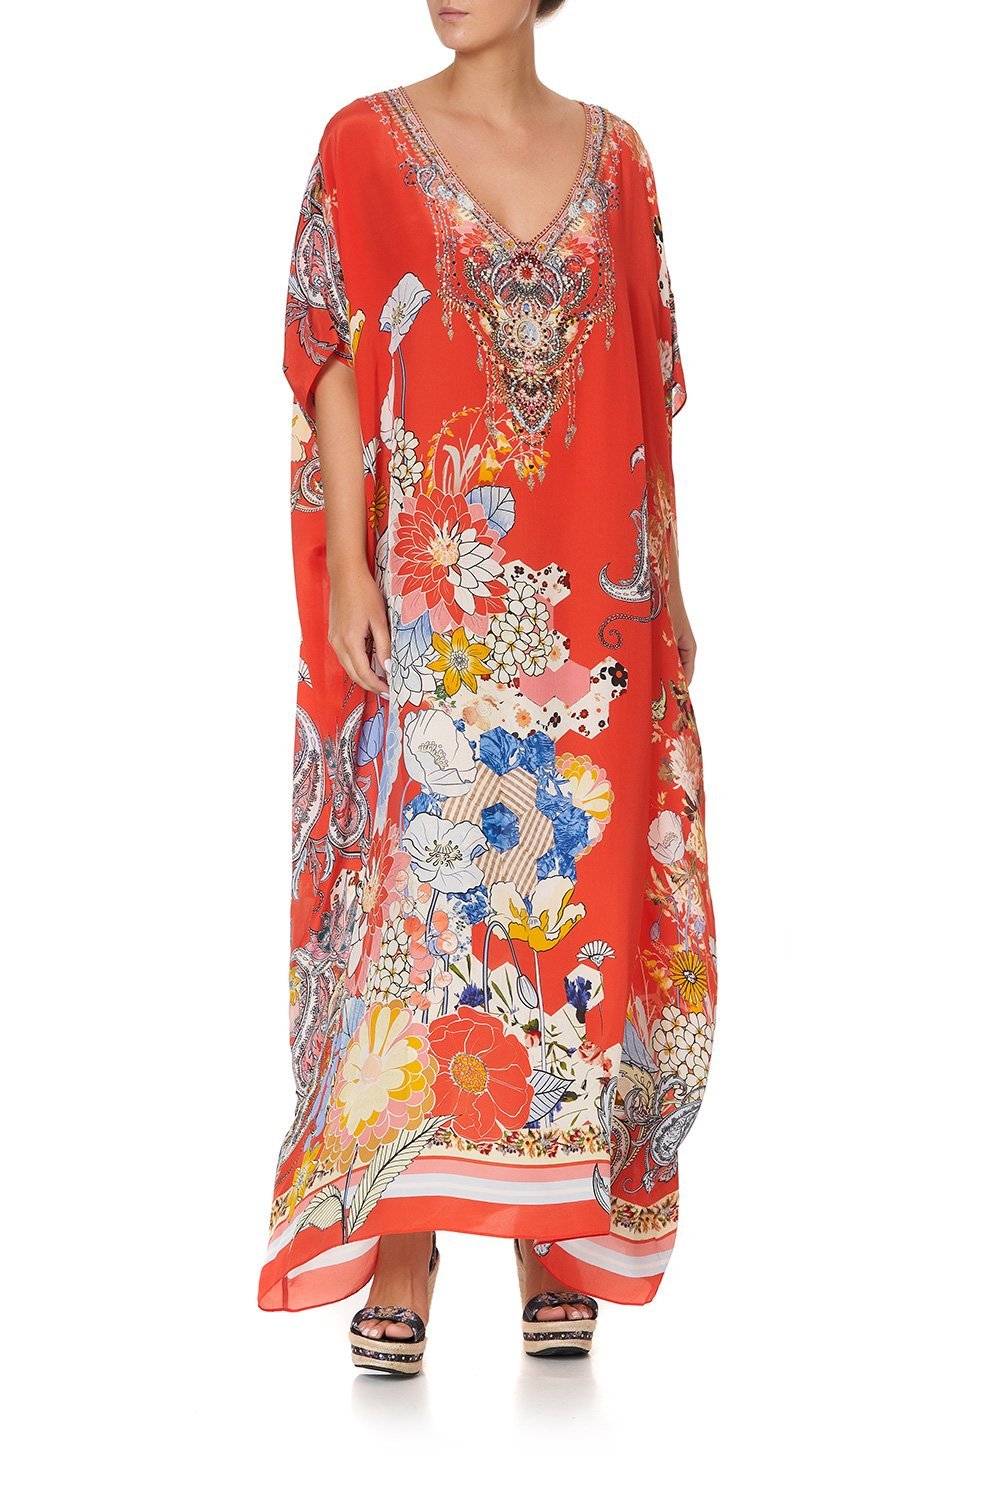 V-NECK KAFTAN PAISLEY IN PATCHES